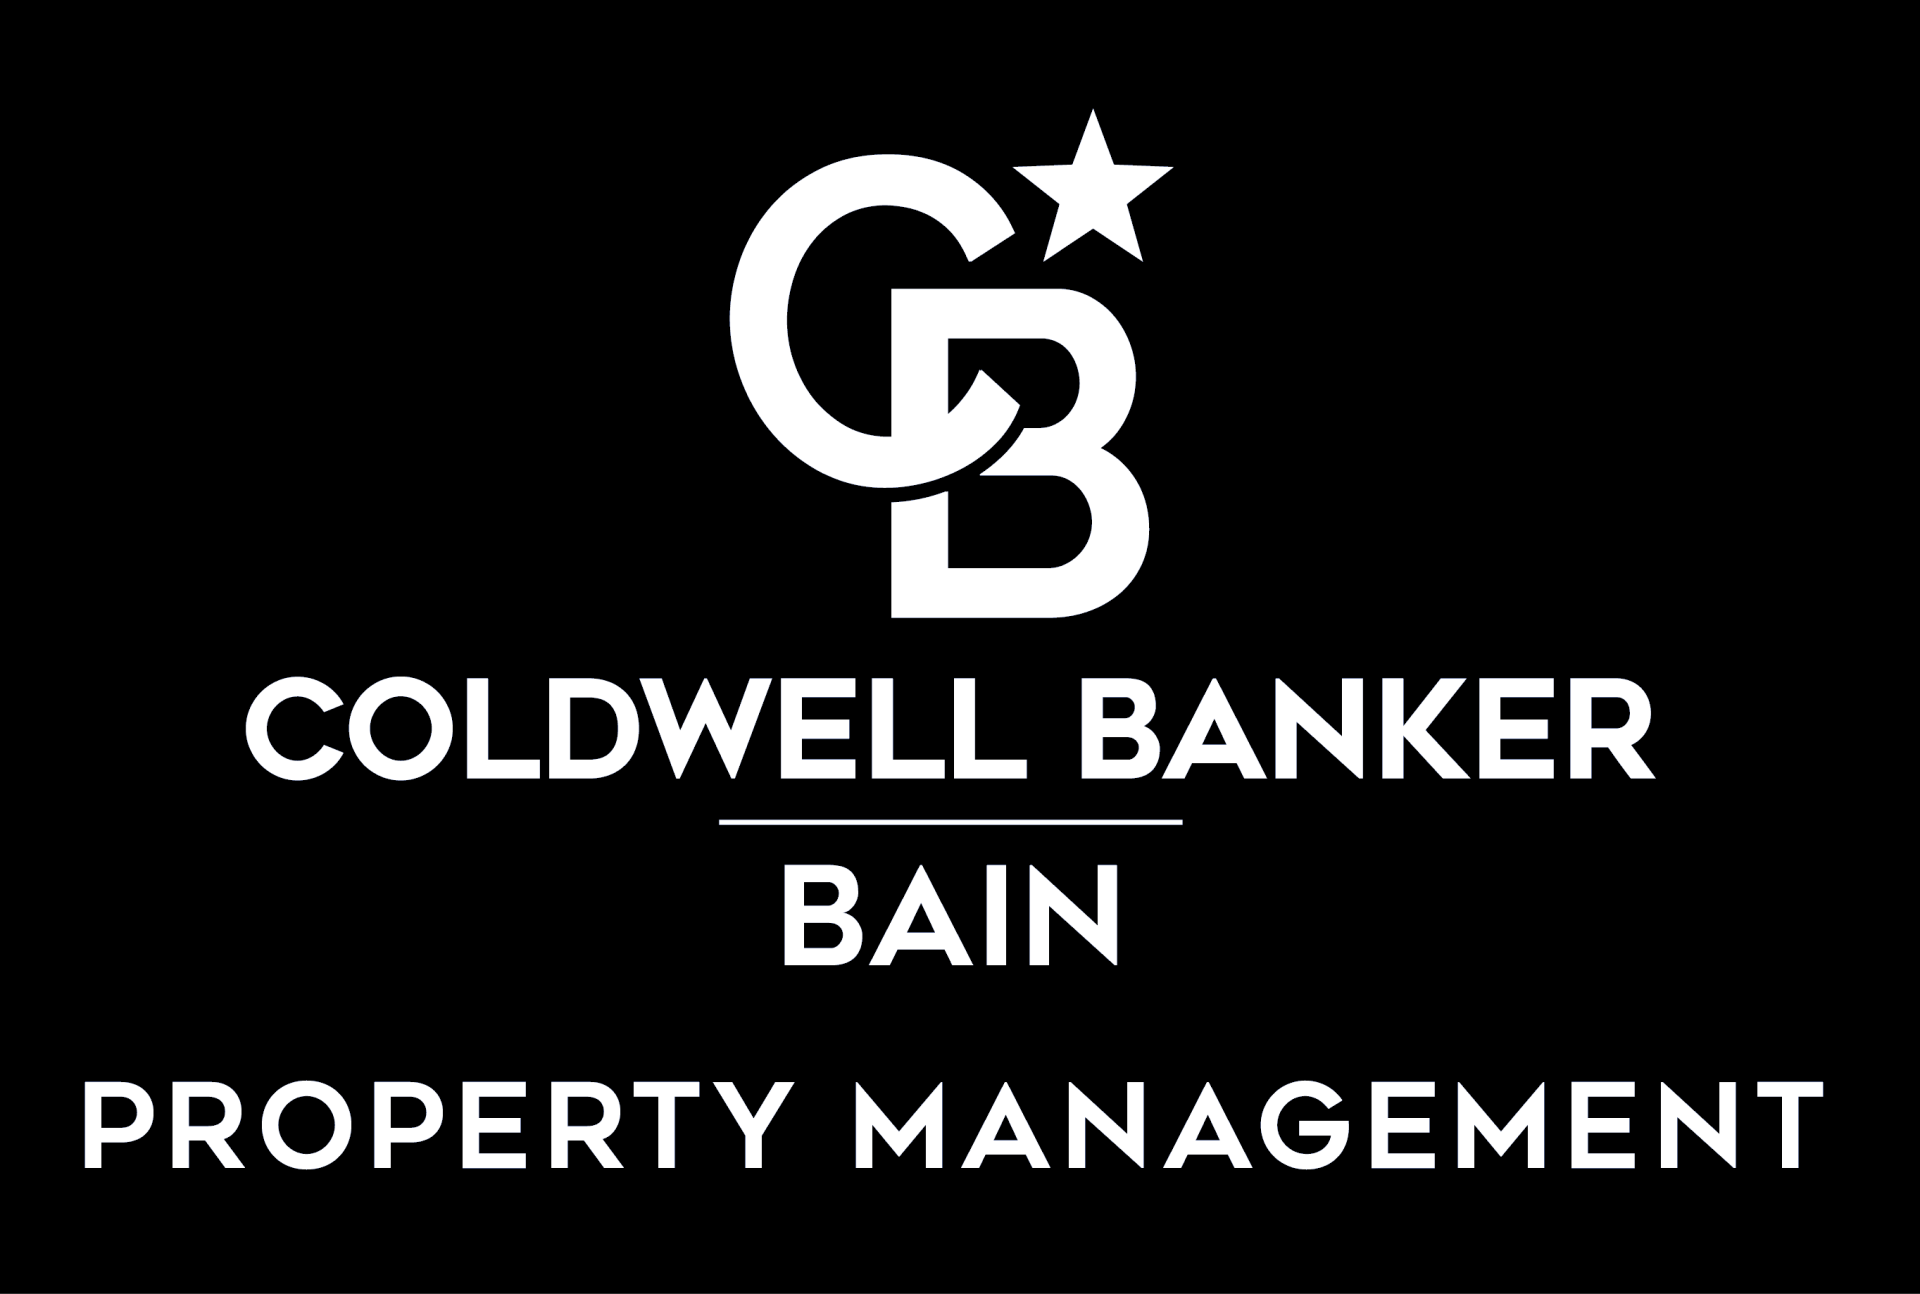 Owner Statement Coldwell Banker Bain Property Management